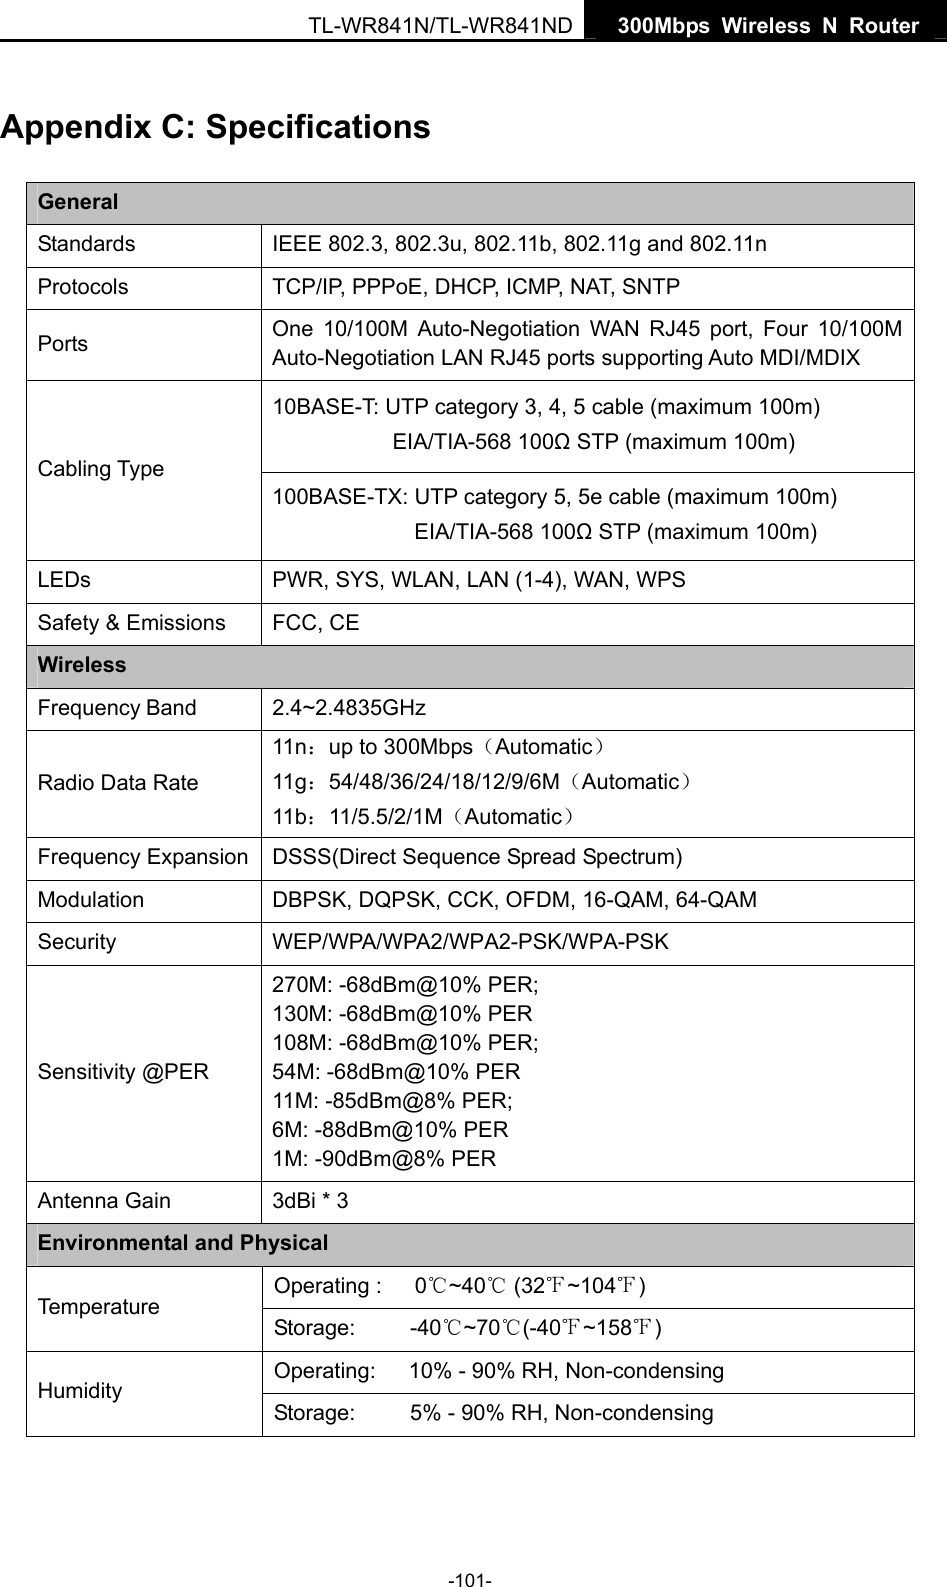  TL-WR841N/TL-WR841ND  300Mbps Wireless N Router  -101- Appendix C: Specifications General Standards  IEEE 802.3, 802.3u, 802.11b, 802.11g and 802.11n Protocols  TCP/IP, PPPoE, DHCP, ICMP, NAT, SNTP Ports  One 10/100M Auto-Negotiation WAN RJ45 port, Four 10/100M Auto-Negotiation LAN RJ45 ports supporting Auto MDI/MDIX 10BASE-T: UTP category 3, 4, 5 cable (maximum 100m) EIA/TIA-568 100Ω STP (maximum 100m) Cabling Type 100BASE-TX: UTP category 5, 5e cable (maximum 100m) EIA/TIA-568 100Ω STP (maximum 100m) LEDs  PWR, SYS, WLAN, LAN (1-4), WAN, WPS Safety &amp; Emissions  FCC, CE Wireless Frequency Band 2.4~2.4835GHz Radio Data Rate 11n：up to 300Mbps（Automatic） 11g：54/48/36/24/18/12/9/6M（Automatic） 11b：11/5.5/2/1M（Automatic） Frequency Expansion  DSSS(Direct Sequence Spread Spectrum) Modulation  DBPSK, DQPSK, CCK, OFDM, 16-QAM, 64-QAM Security WEP/WPA/WPA2/WPA2-PSK/WPA-PSK Sensitivity @PER 270M: -68dBm@10% PER; 130M: -68dBm@10% PER 108M: -68dBm@10% PER;   54M: -68dBm@10% PER 11M: -85dBm@8% PER;   6M: -88dBm@10% PER 1M: -90dBm@8% PER Antenna Gain  3dBi * 3   Environmental and Physical Operating :   0℃~40℃ (32 ~104℉℉) Temperature Storage:     -40℃~70℃(-40℉~158℉) Operating:      10% - 90% RH, Non-condensing Humidity Storage:          5% - 90% RH, Non-condensing 